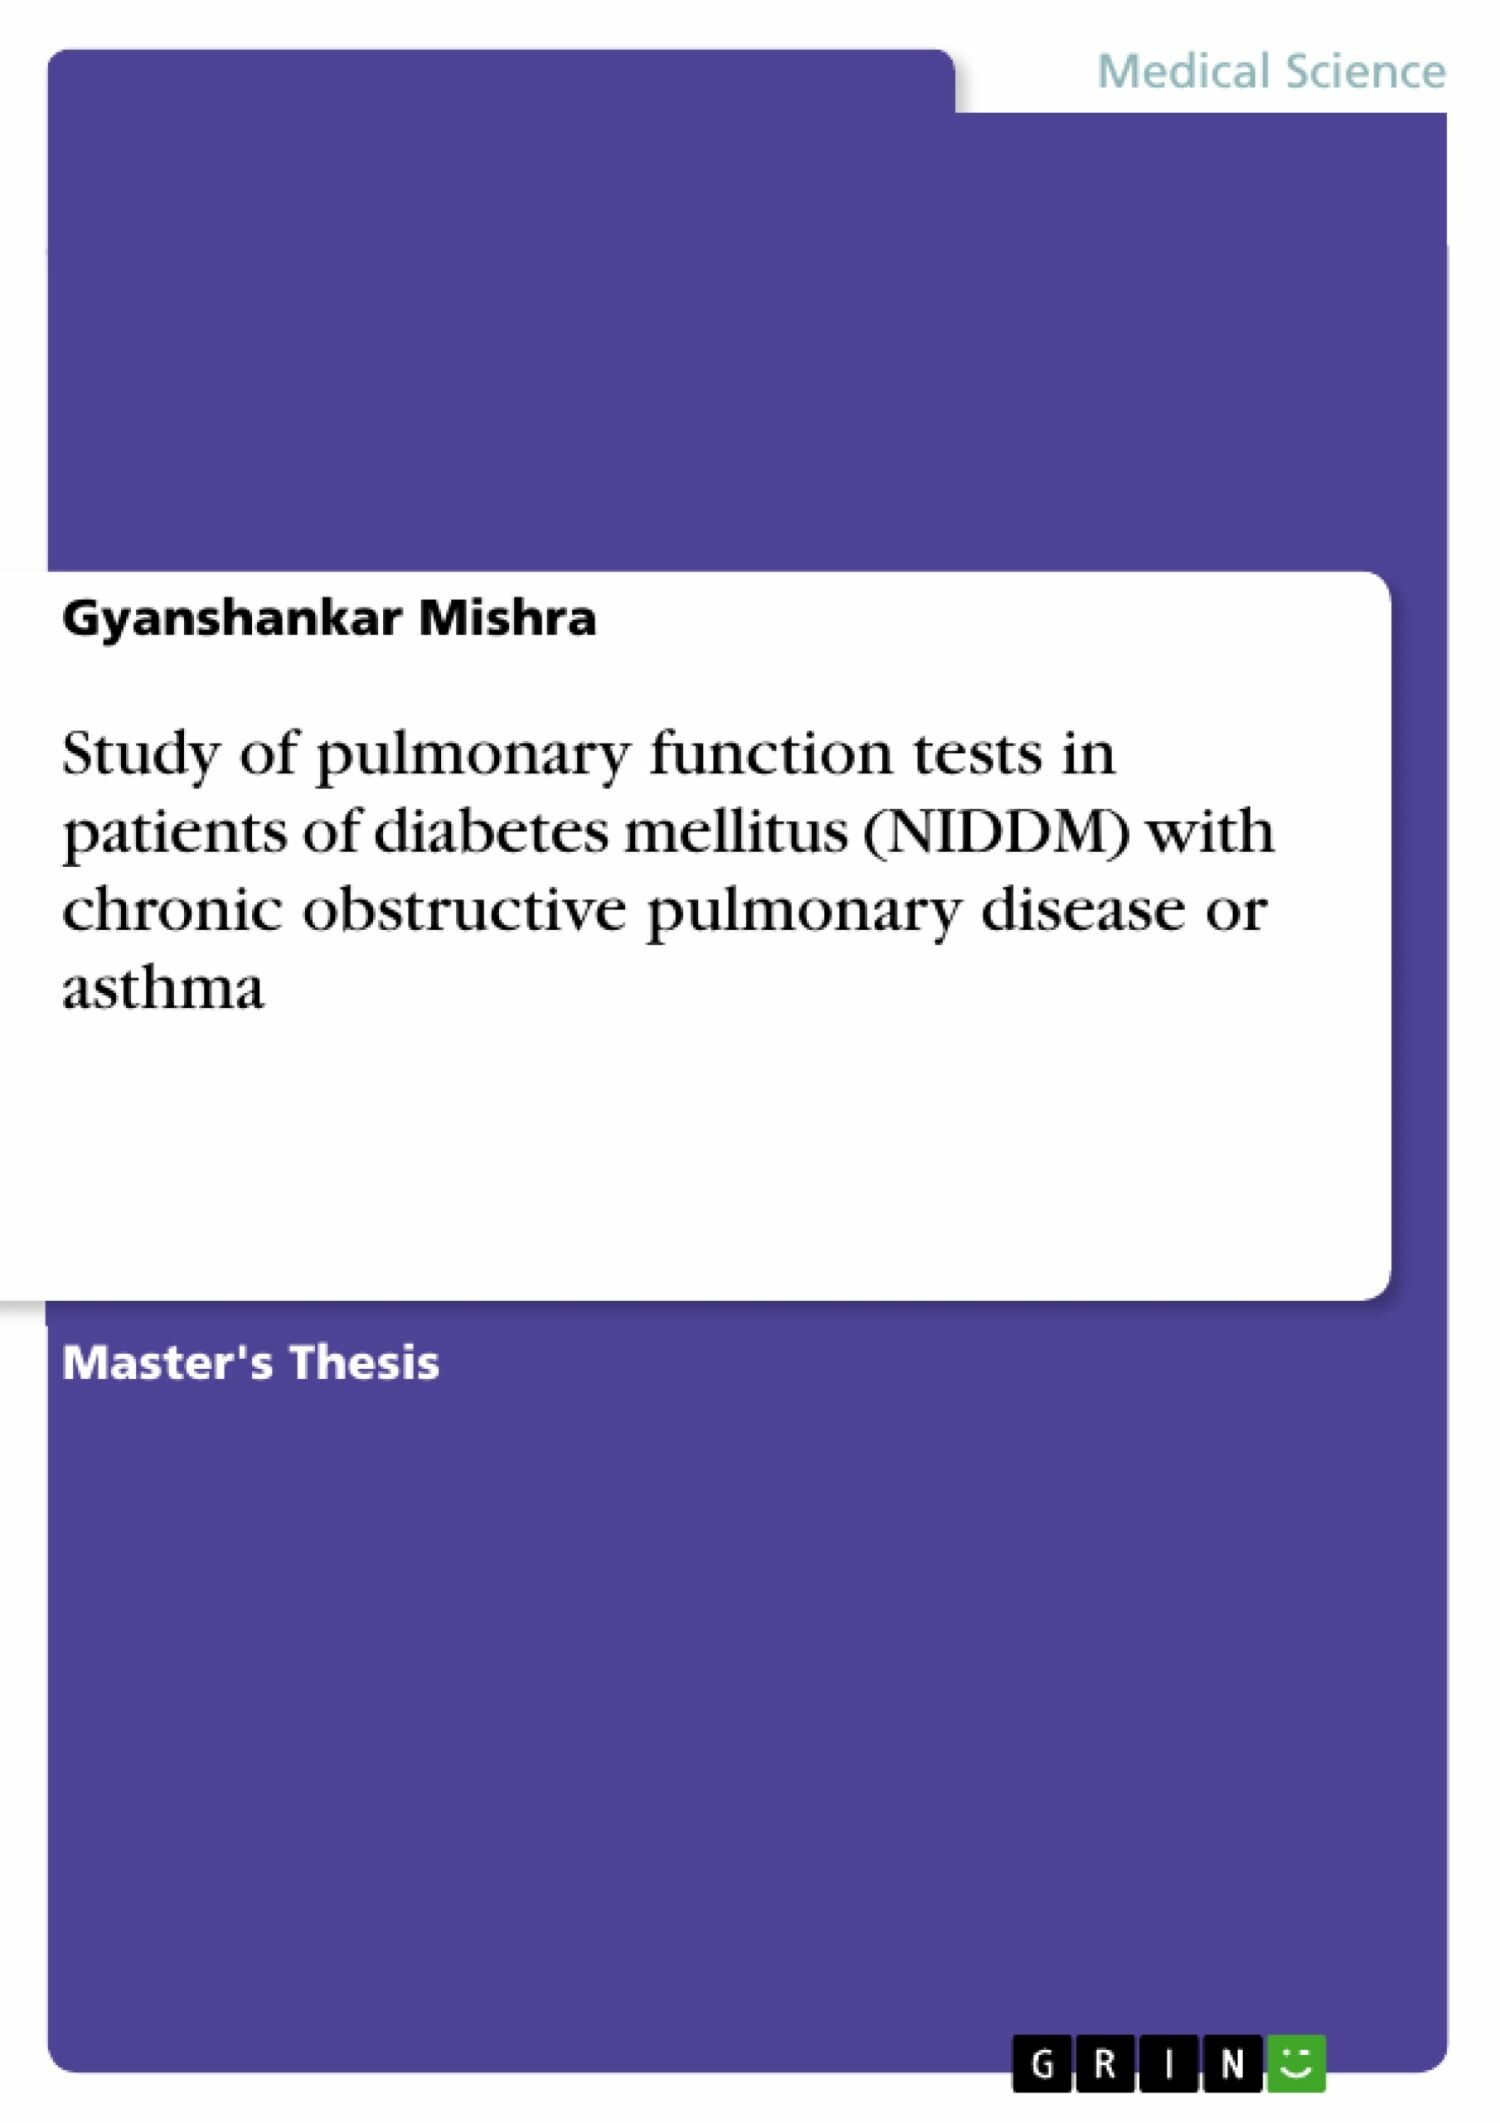 Cover Study of pulmonary function tests in patients of diabetes mellitus (NIDDM) with chronic obstructive pulmonary disease or asthma